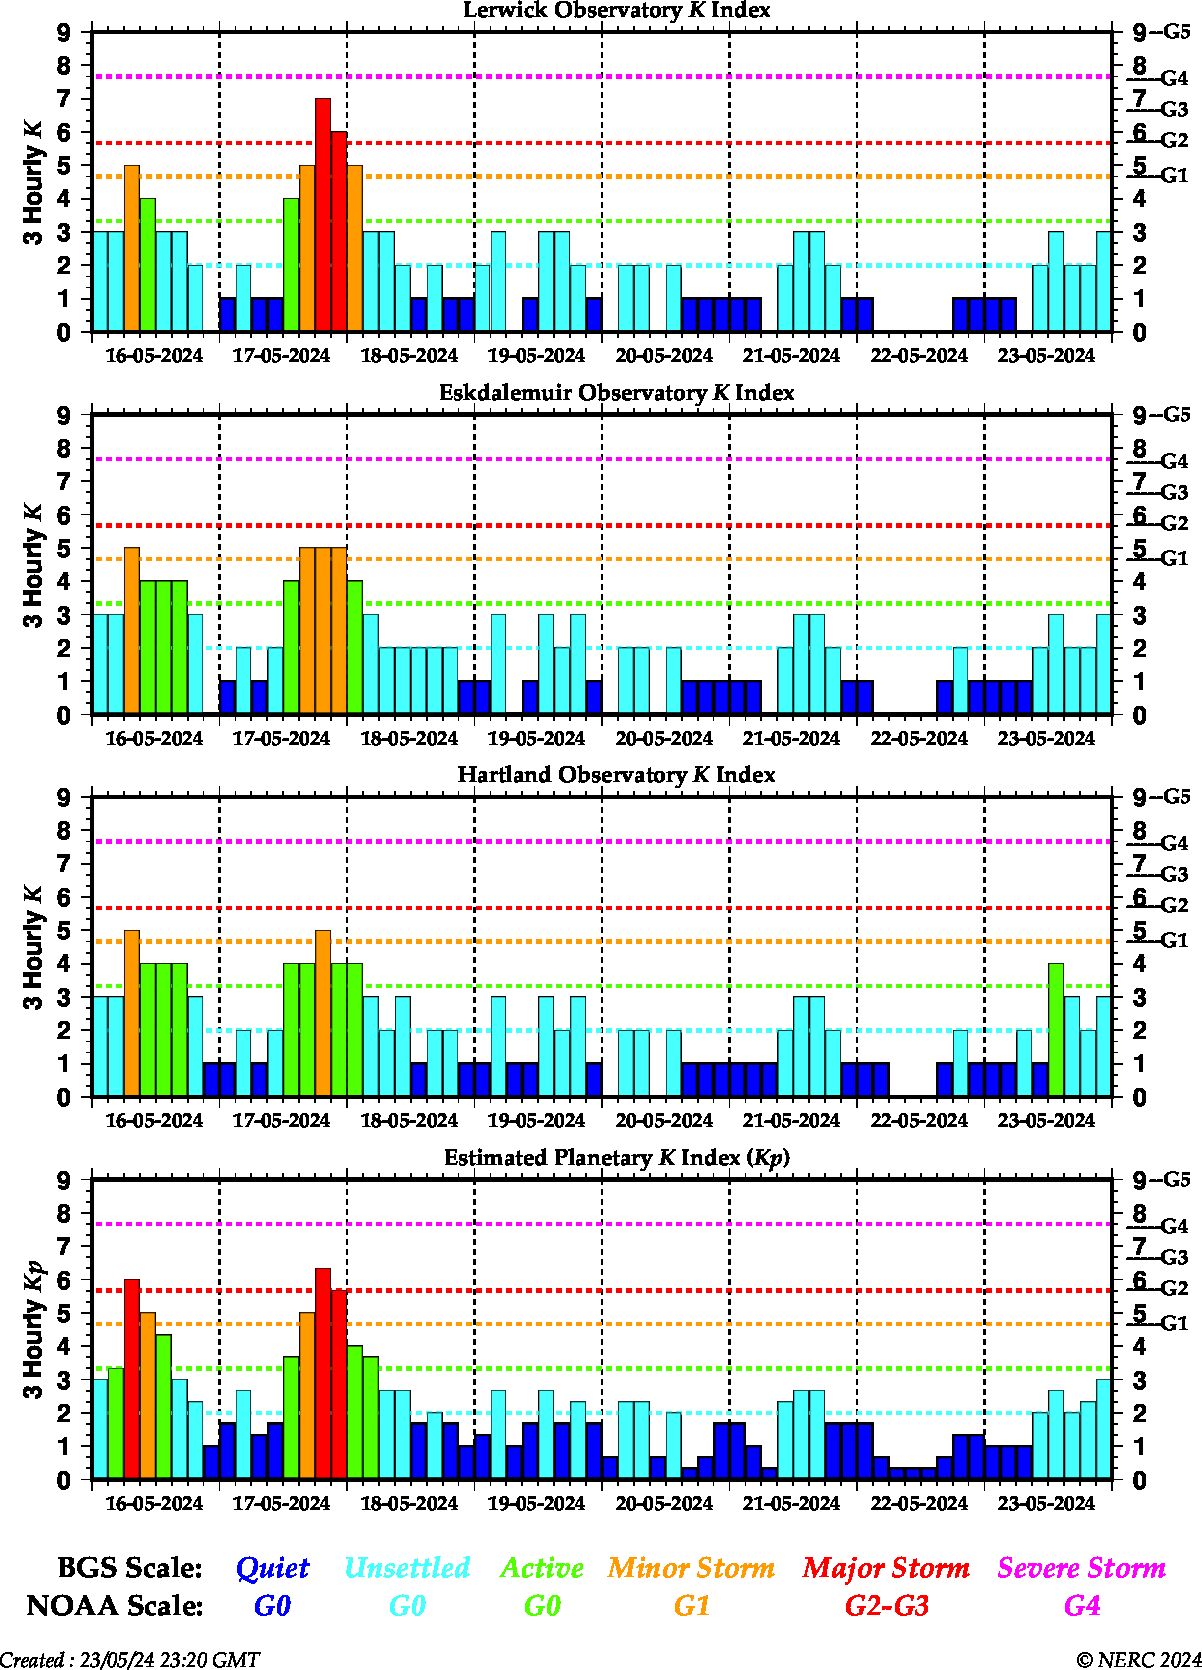 K indices for the UK observatories and global Kp